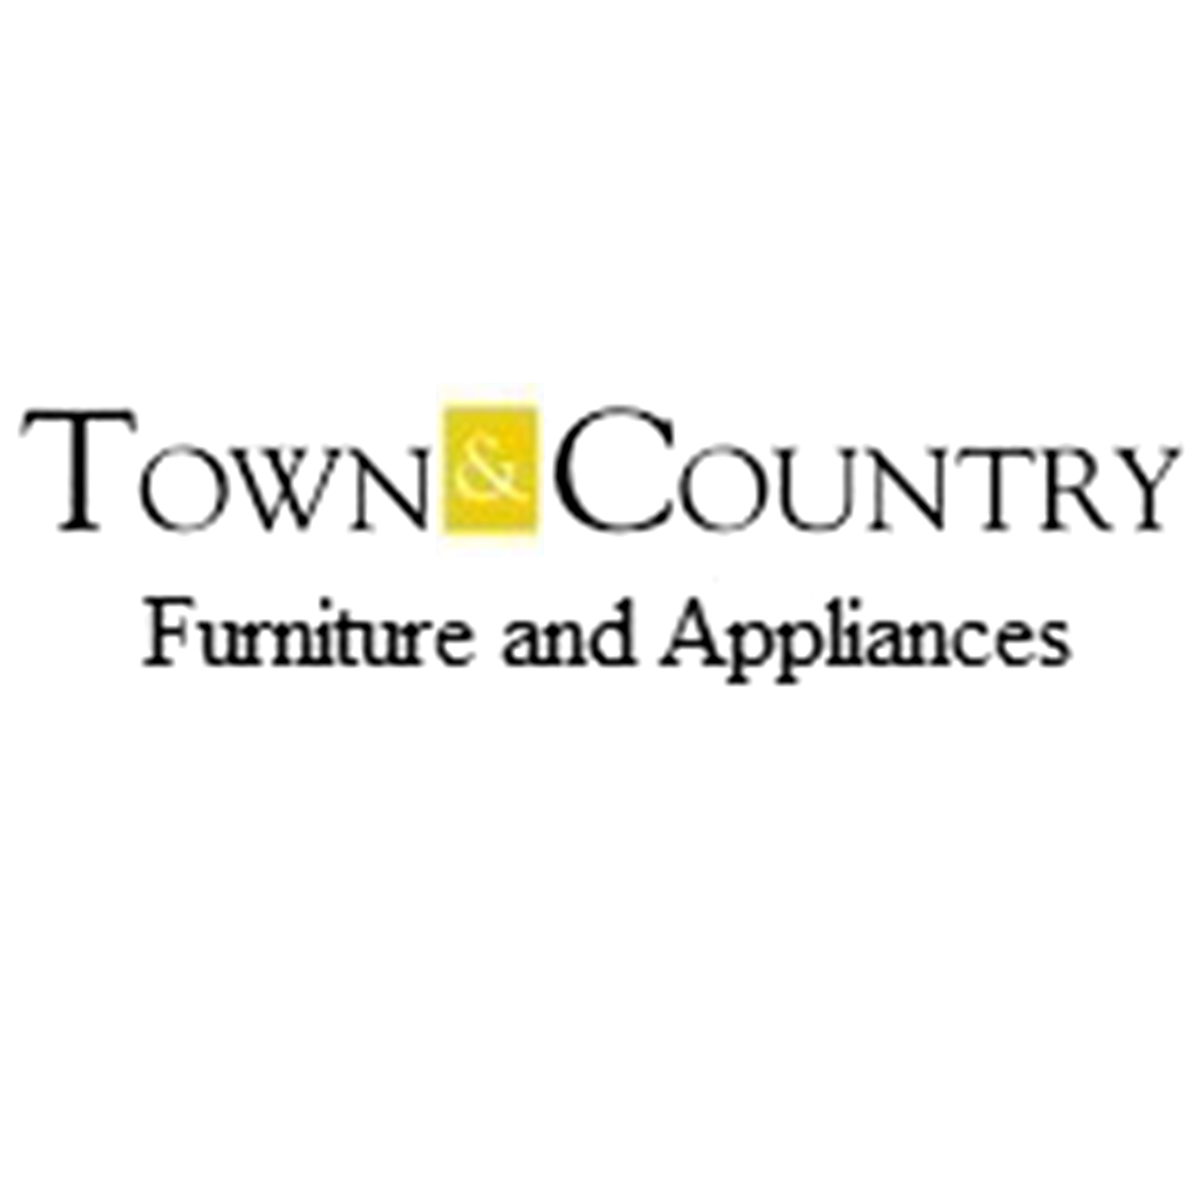 Town & Country Furniture and Appliance Inc.-Farmville VA - Logo